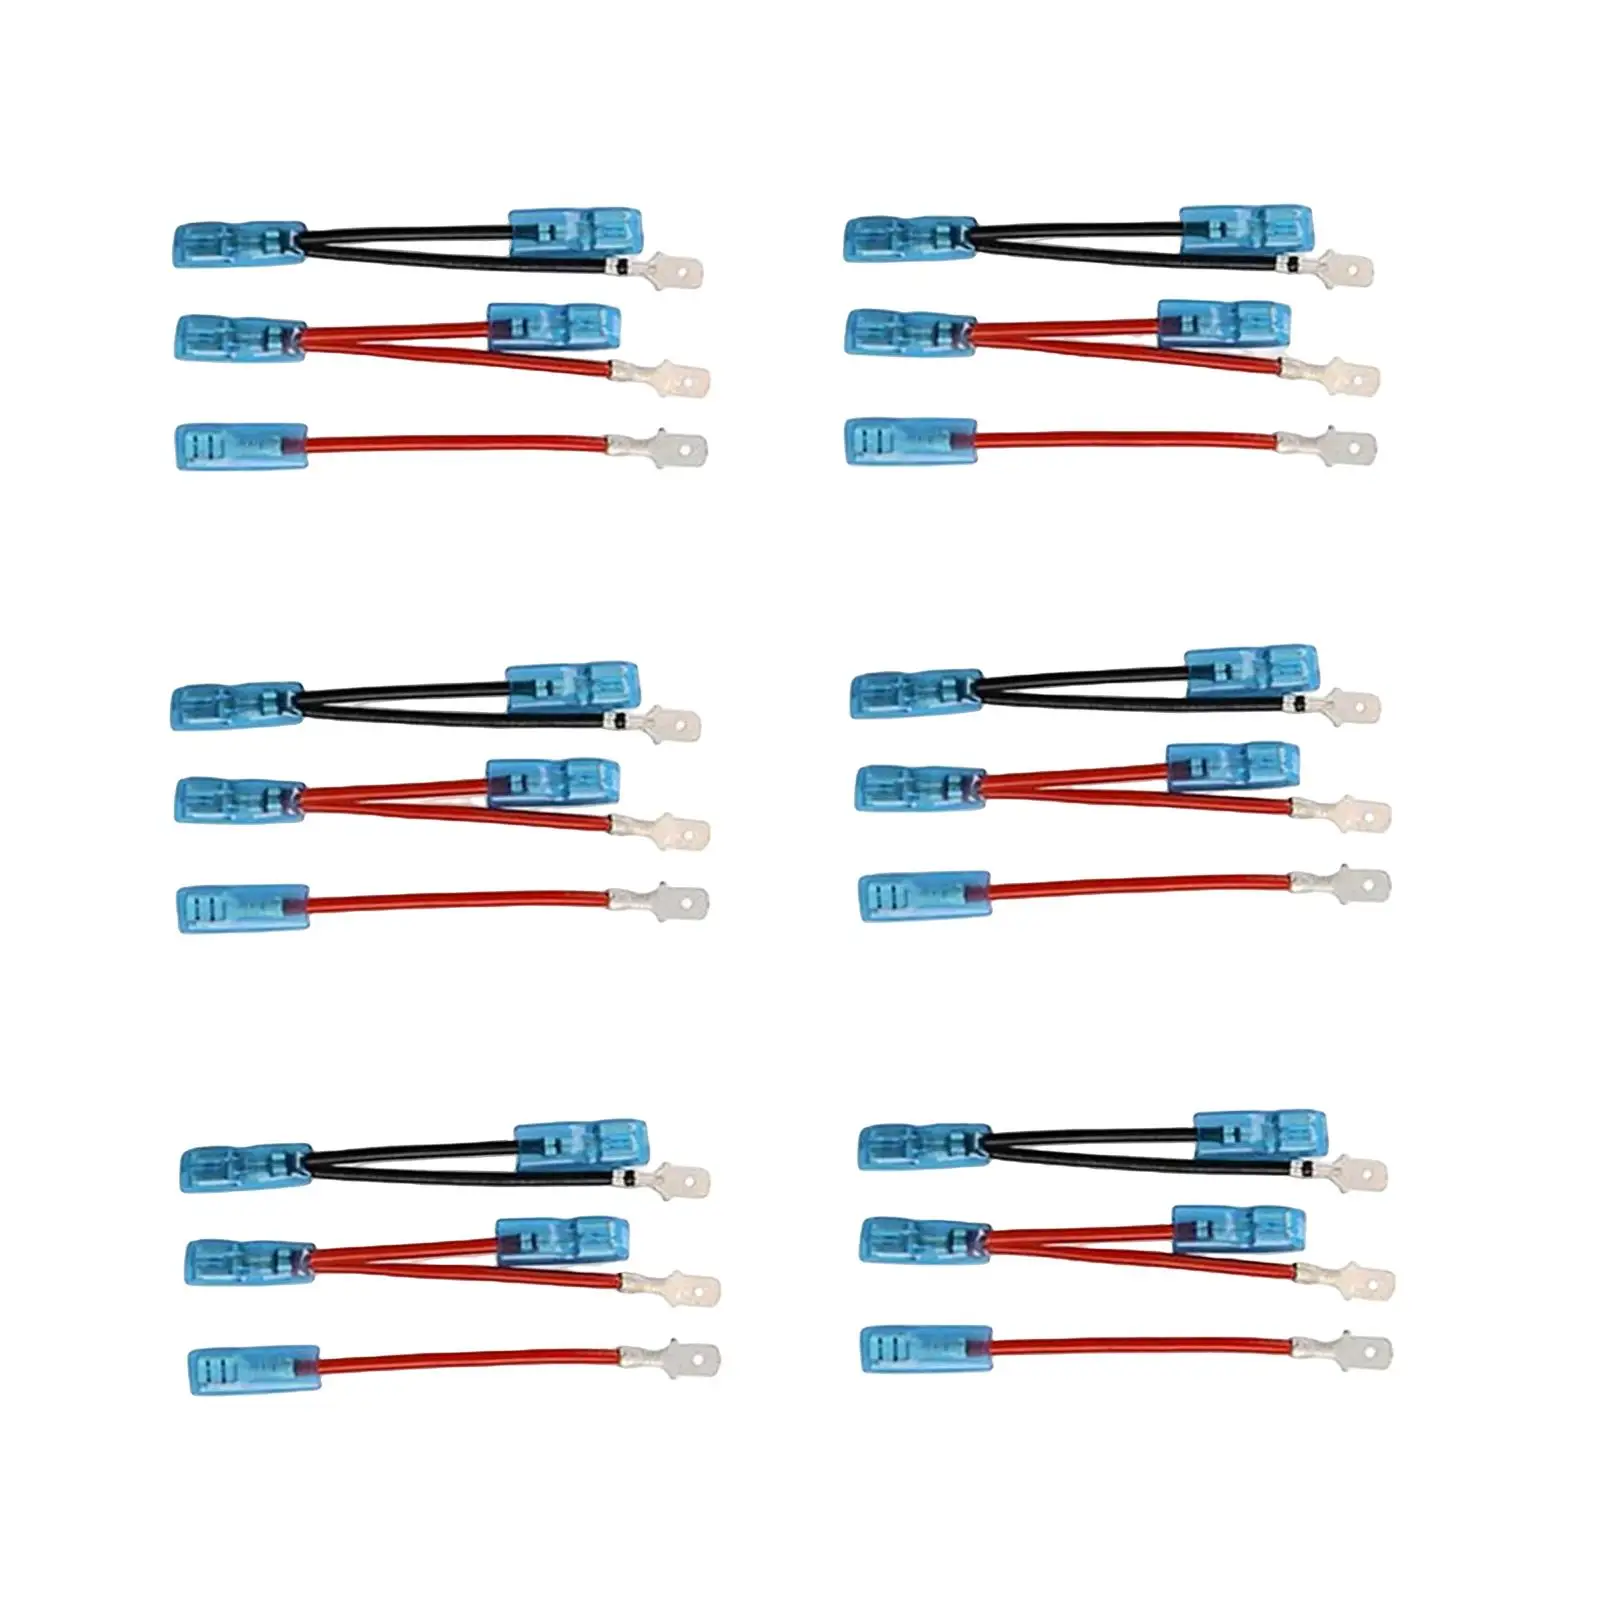 6 Pieces 5 Pin Rocker Switch Jumper Wires Set Spare Parts for Trucks